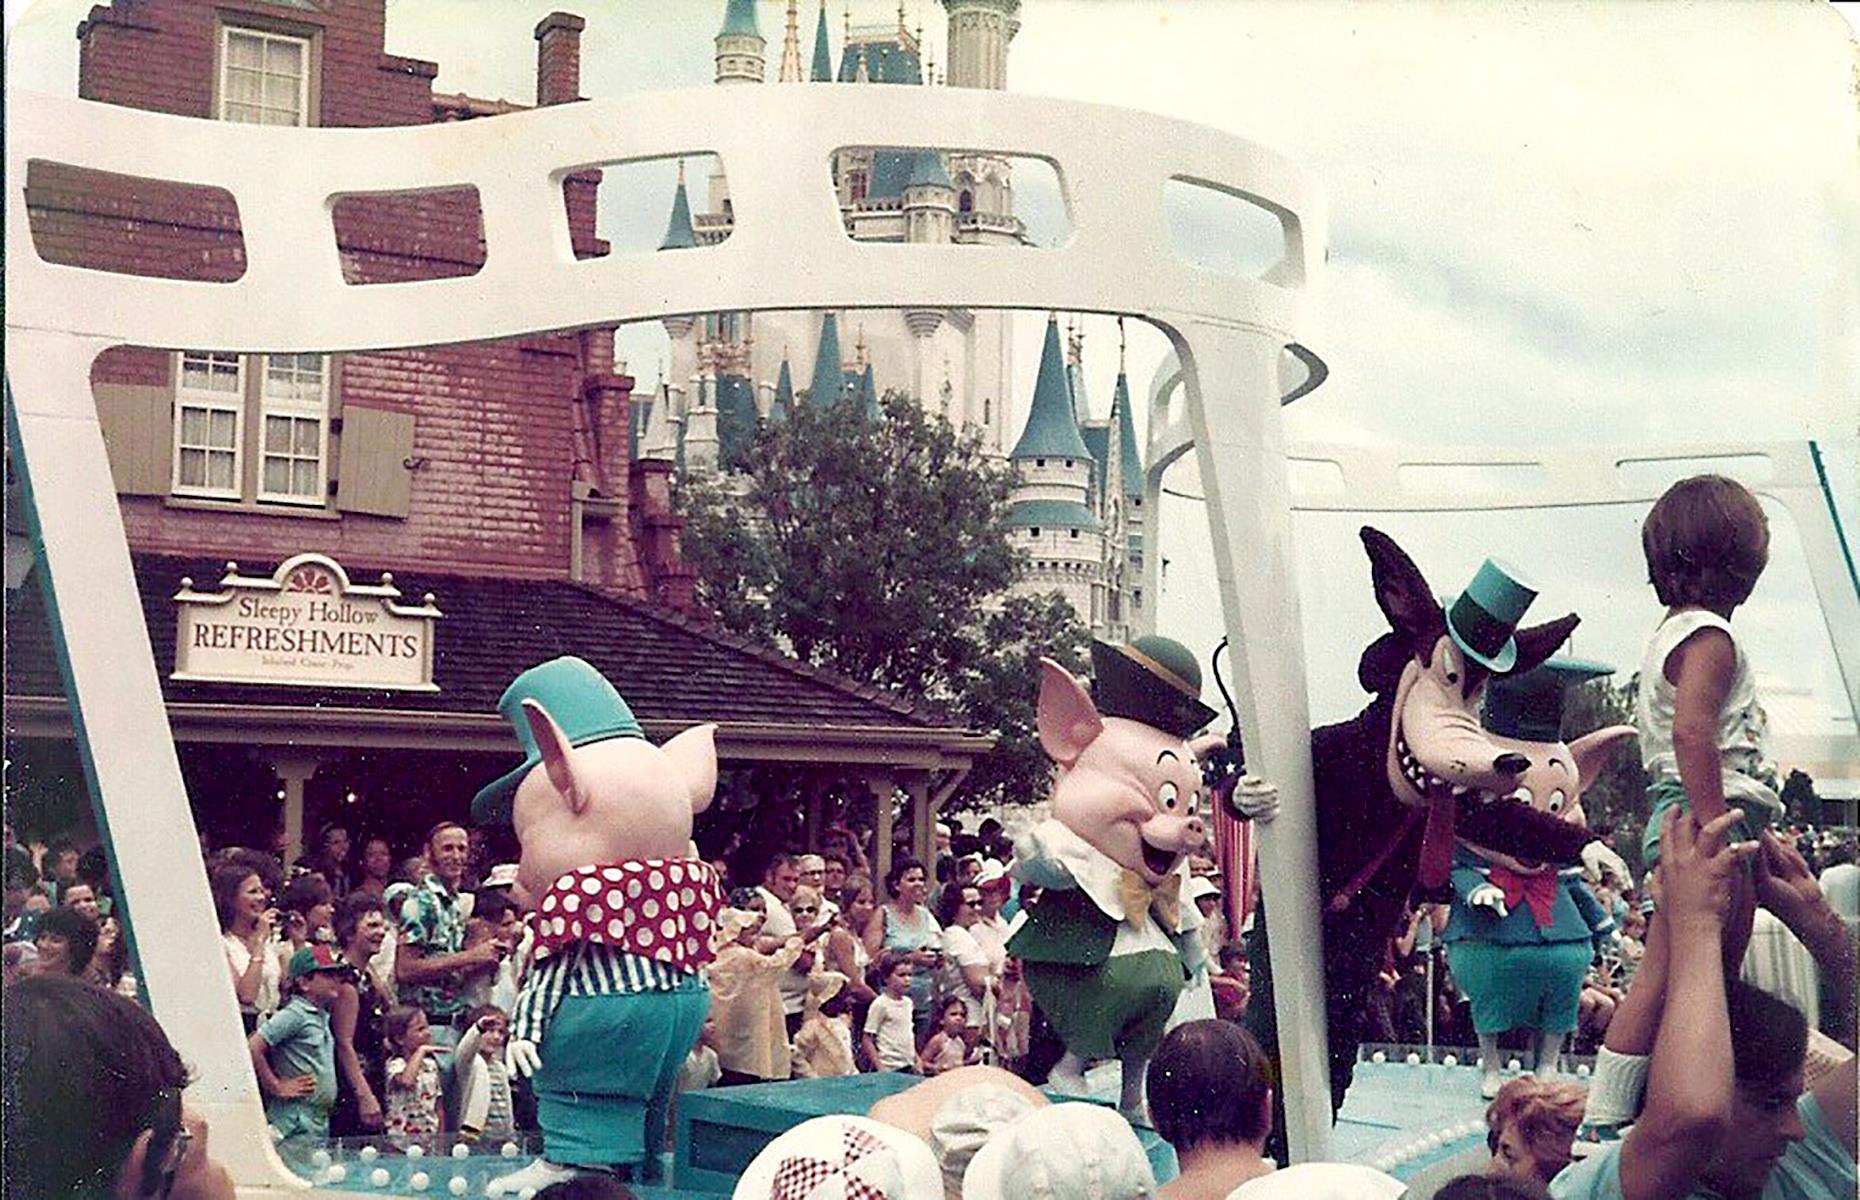 Just five years after Florida's Magic Kingdom opened, America celebrated its bicentennial – and, in true Disney style, the theme park marked the special occasion with parties and parades. Here children and adults look on in awe as a float carrying the Three Little Pigs and the Big Bad Wolf glides through the streets.